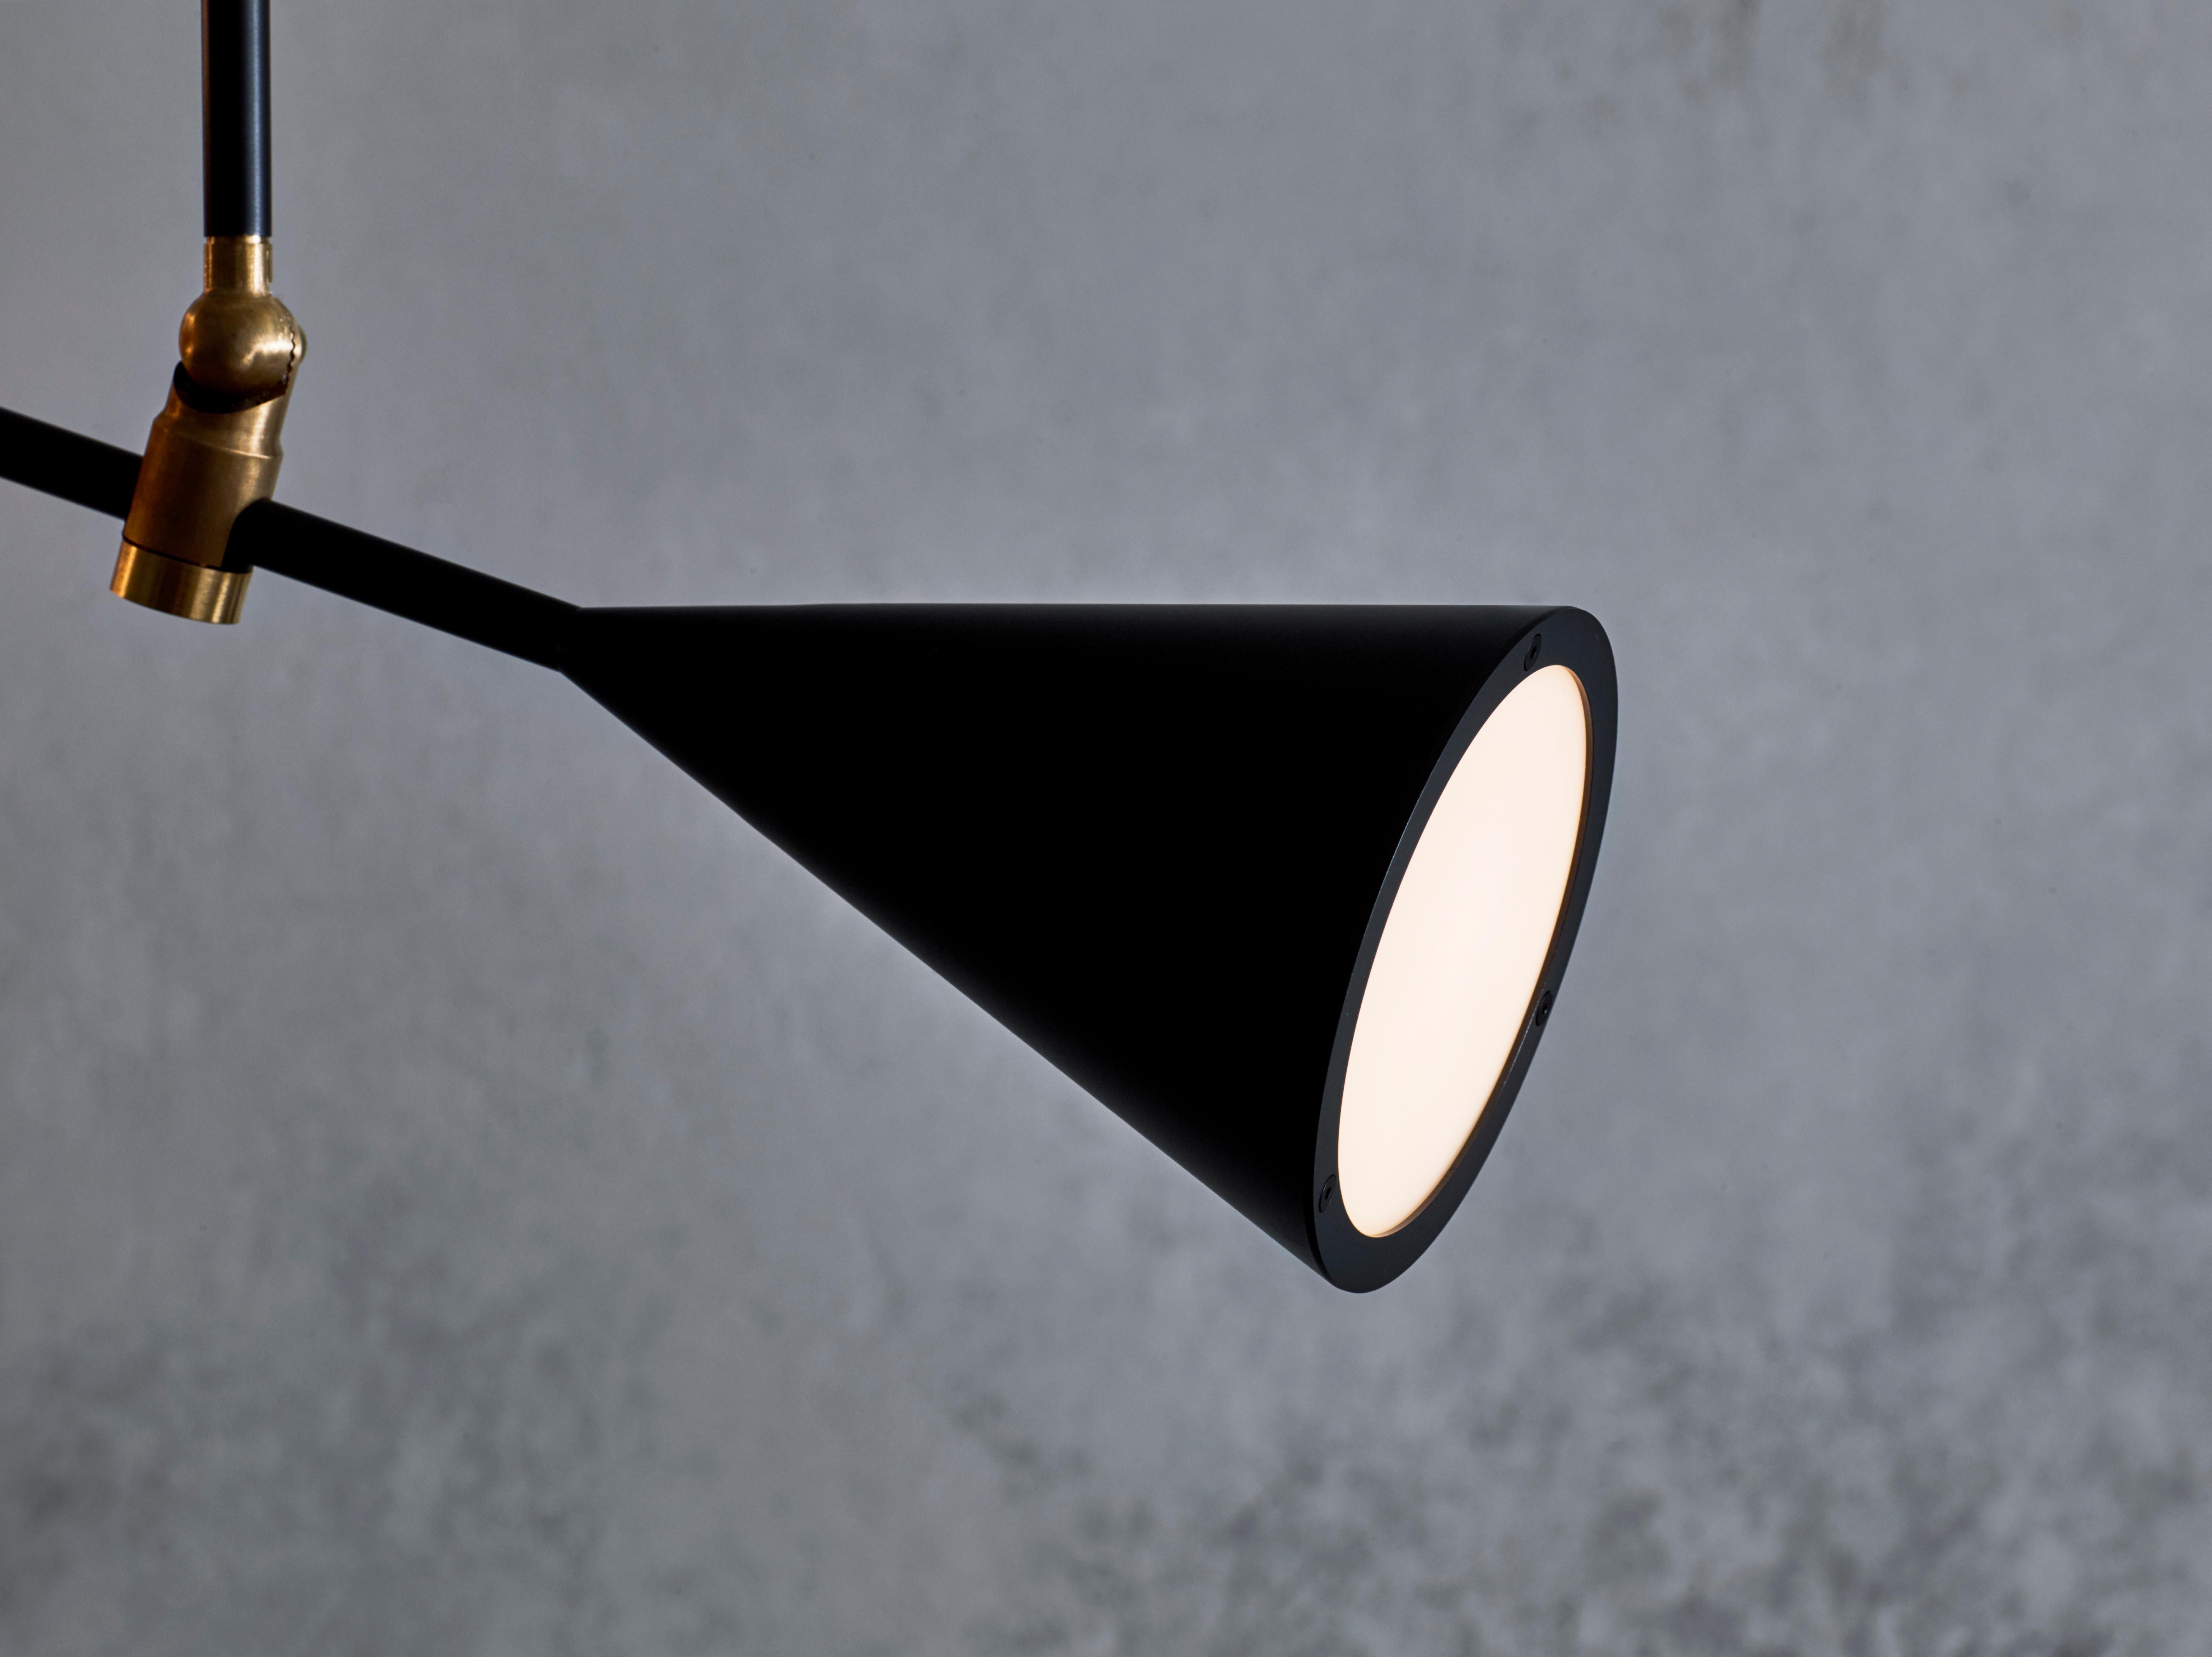 A conical light source at one end and a handblown matte white glass orb on the other hold this piece in balance. The central hinge mechanism allows adjustment of the fixture to any desired angle. Available in satin black (a rich warm black) and